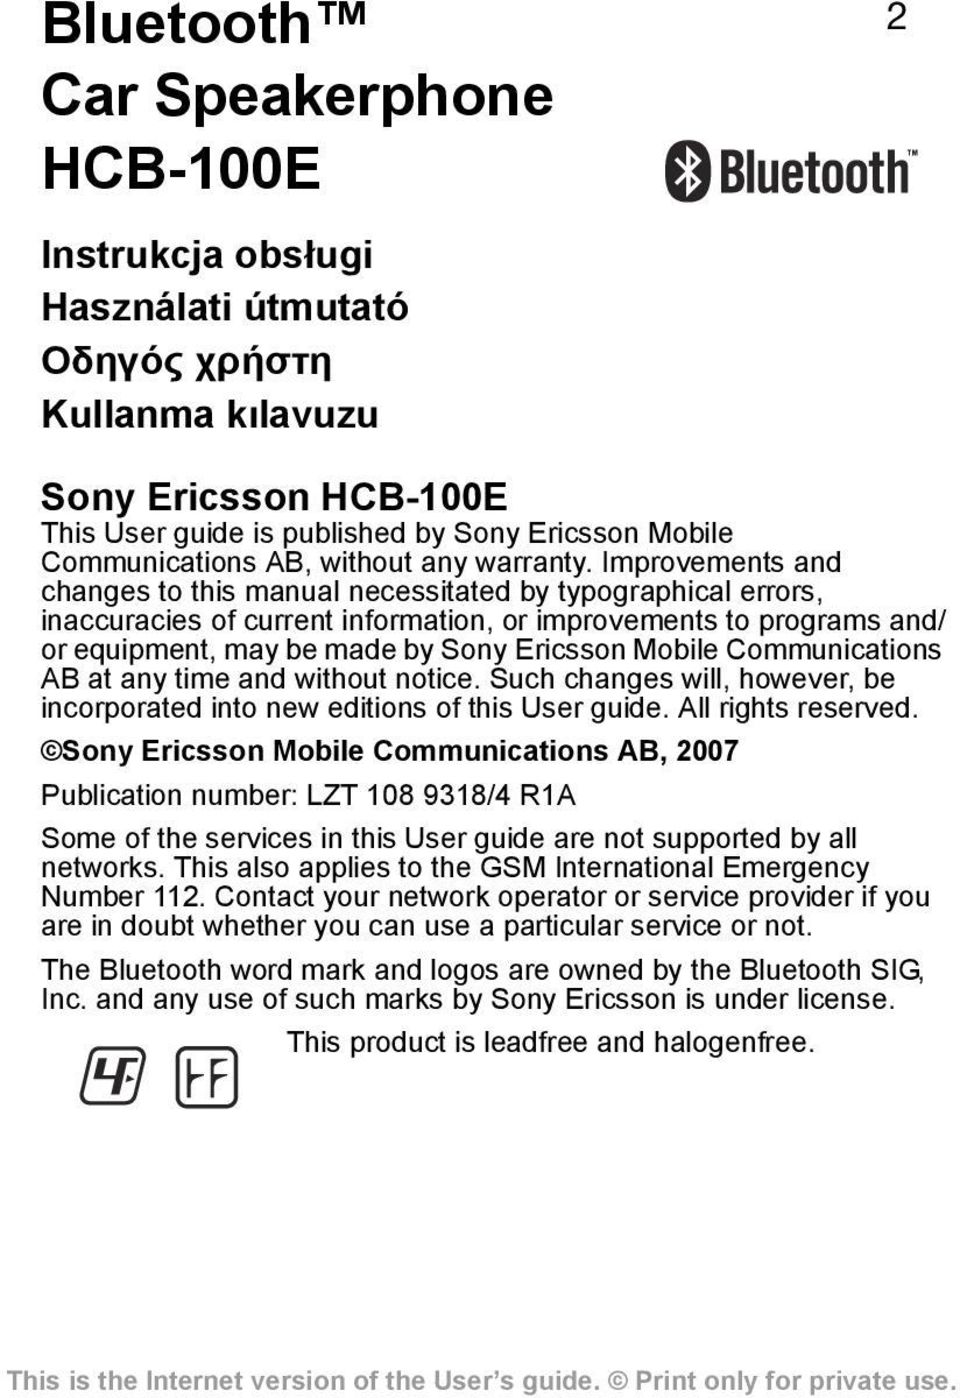 Improvements and changes to this manual necessitated by typographical errors, inaccuracies of current information, or improvements to programs and/ or equipment, may be made by Sony Ericsson Mobile